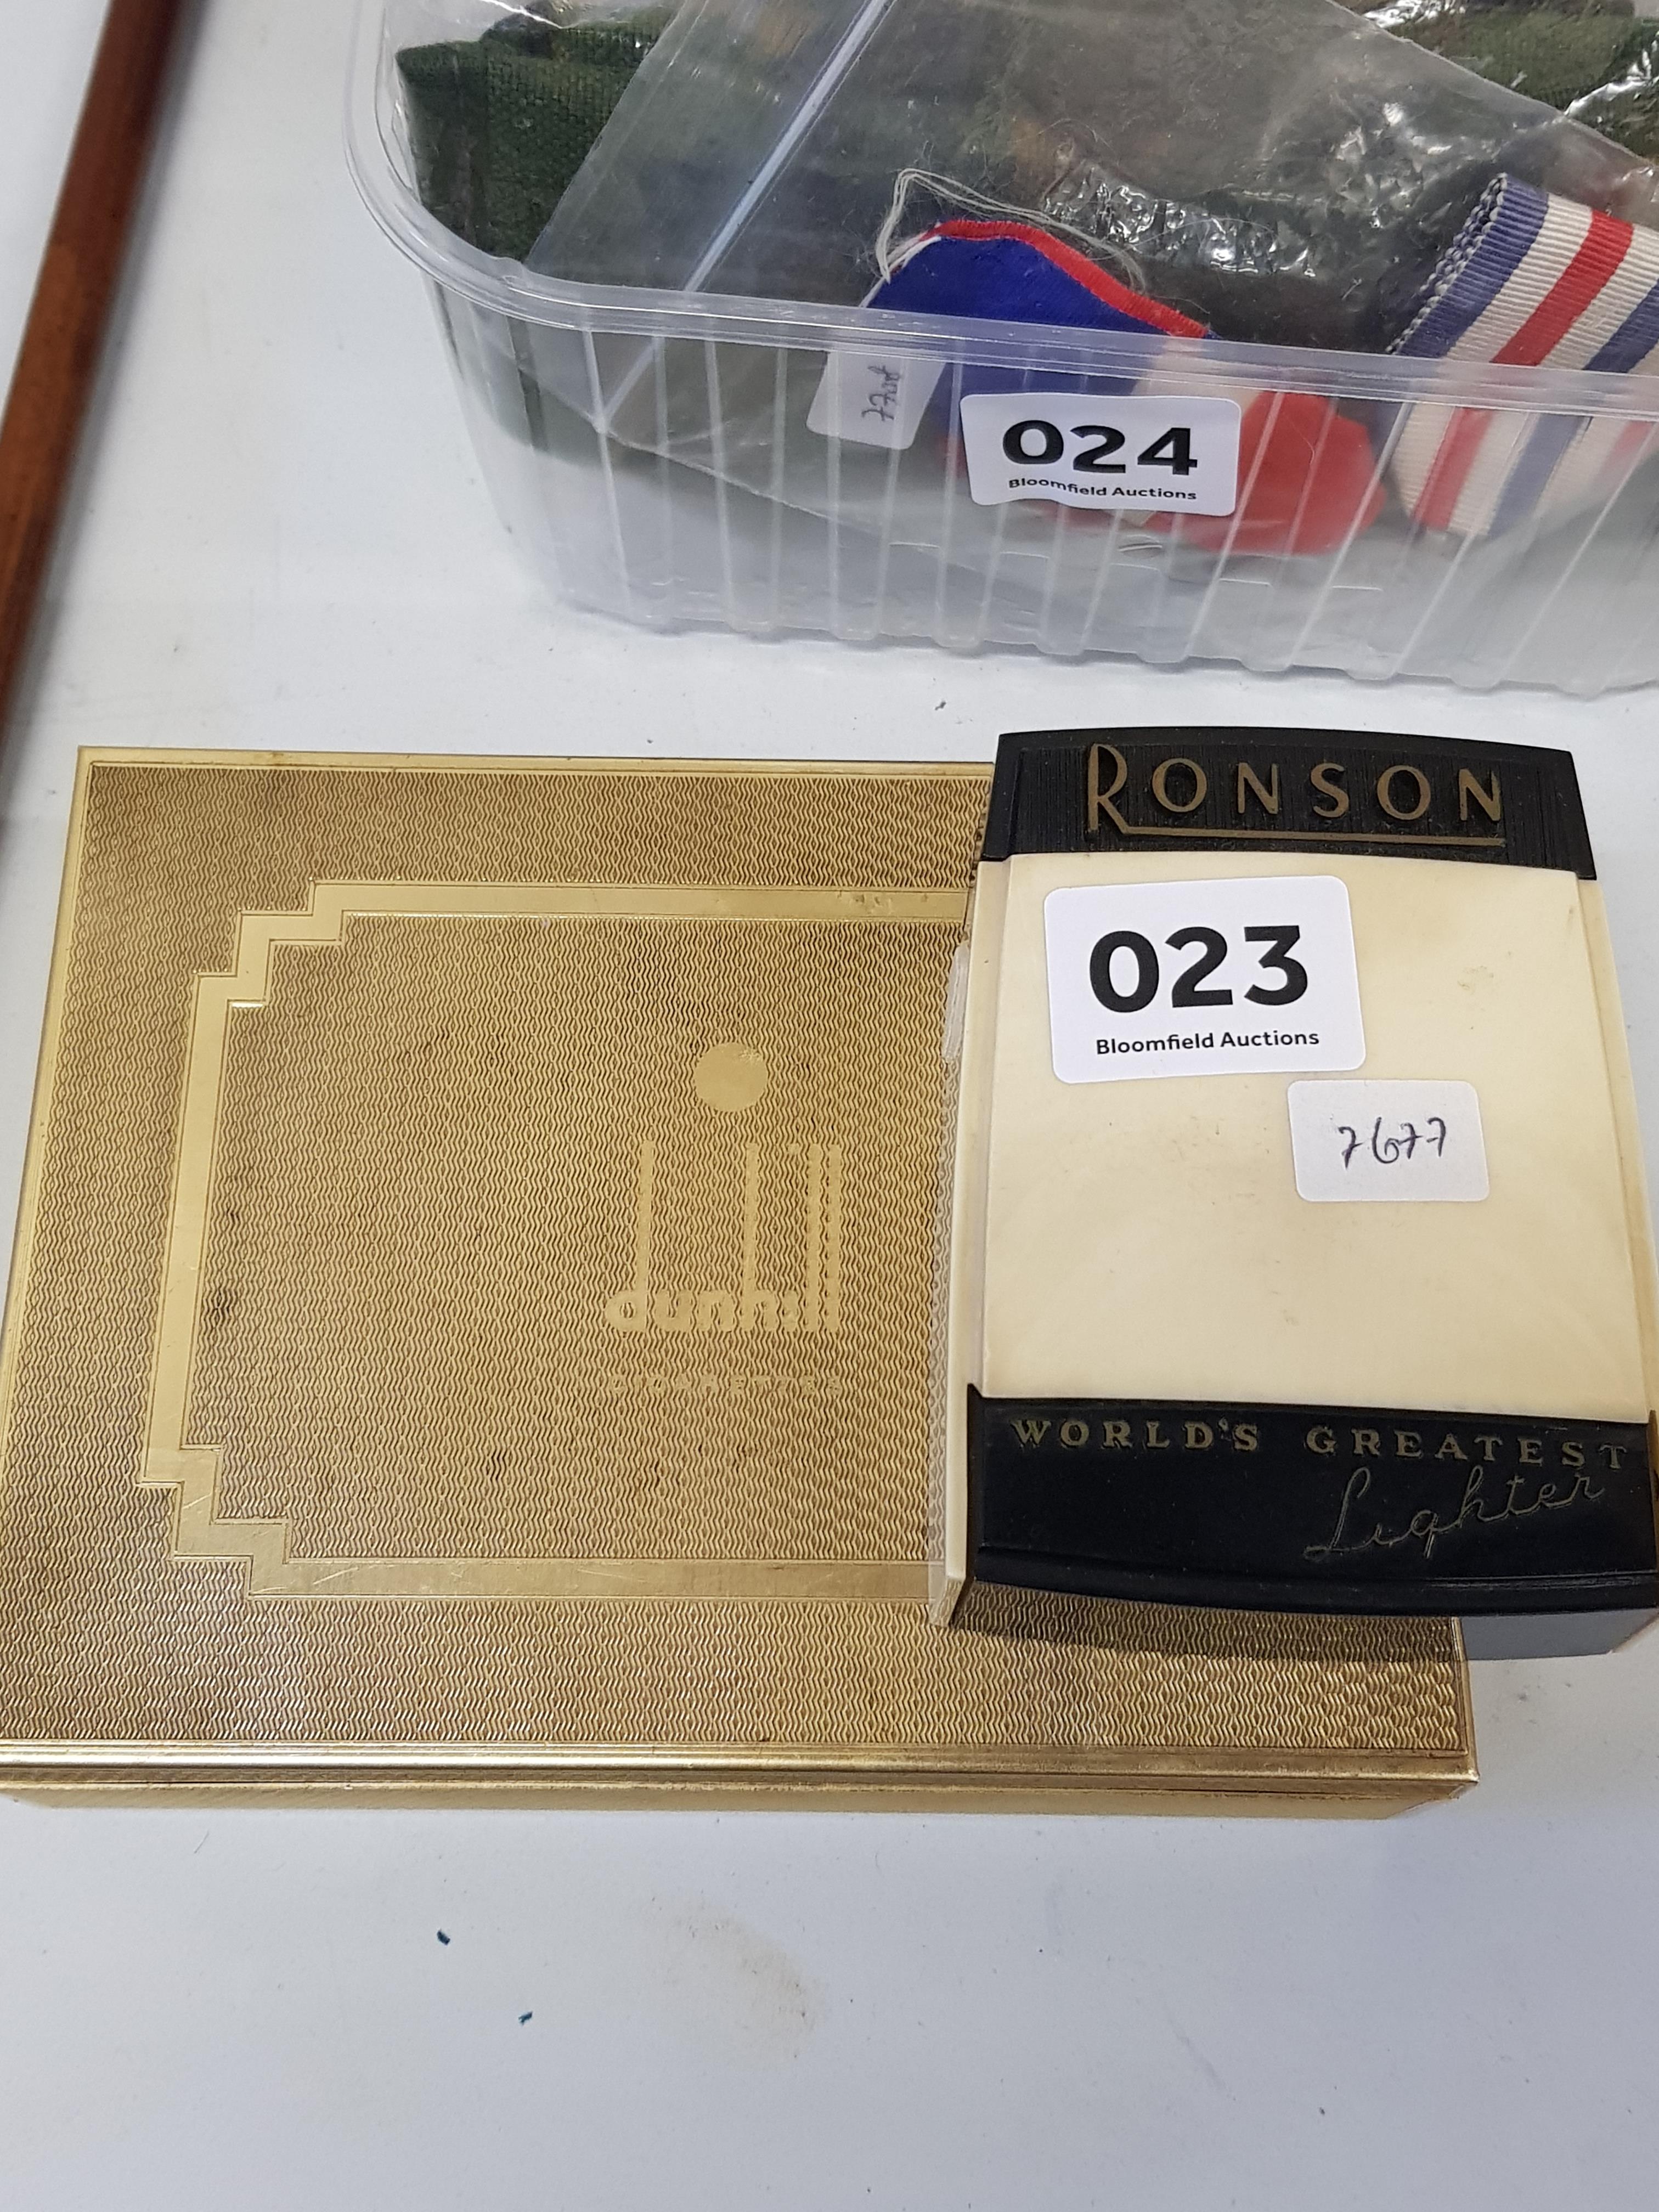 DUNHILL CIGARETTE BOX AND RONSON LIGHTER